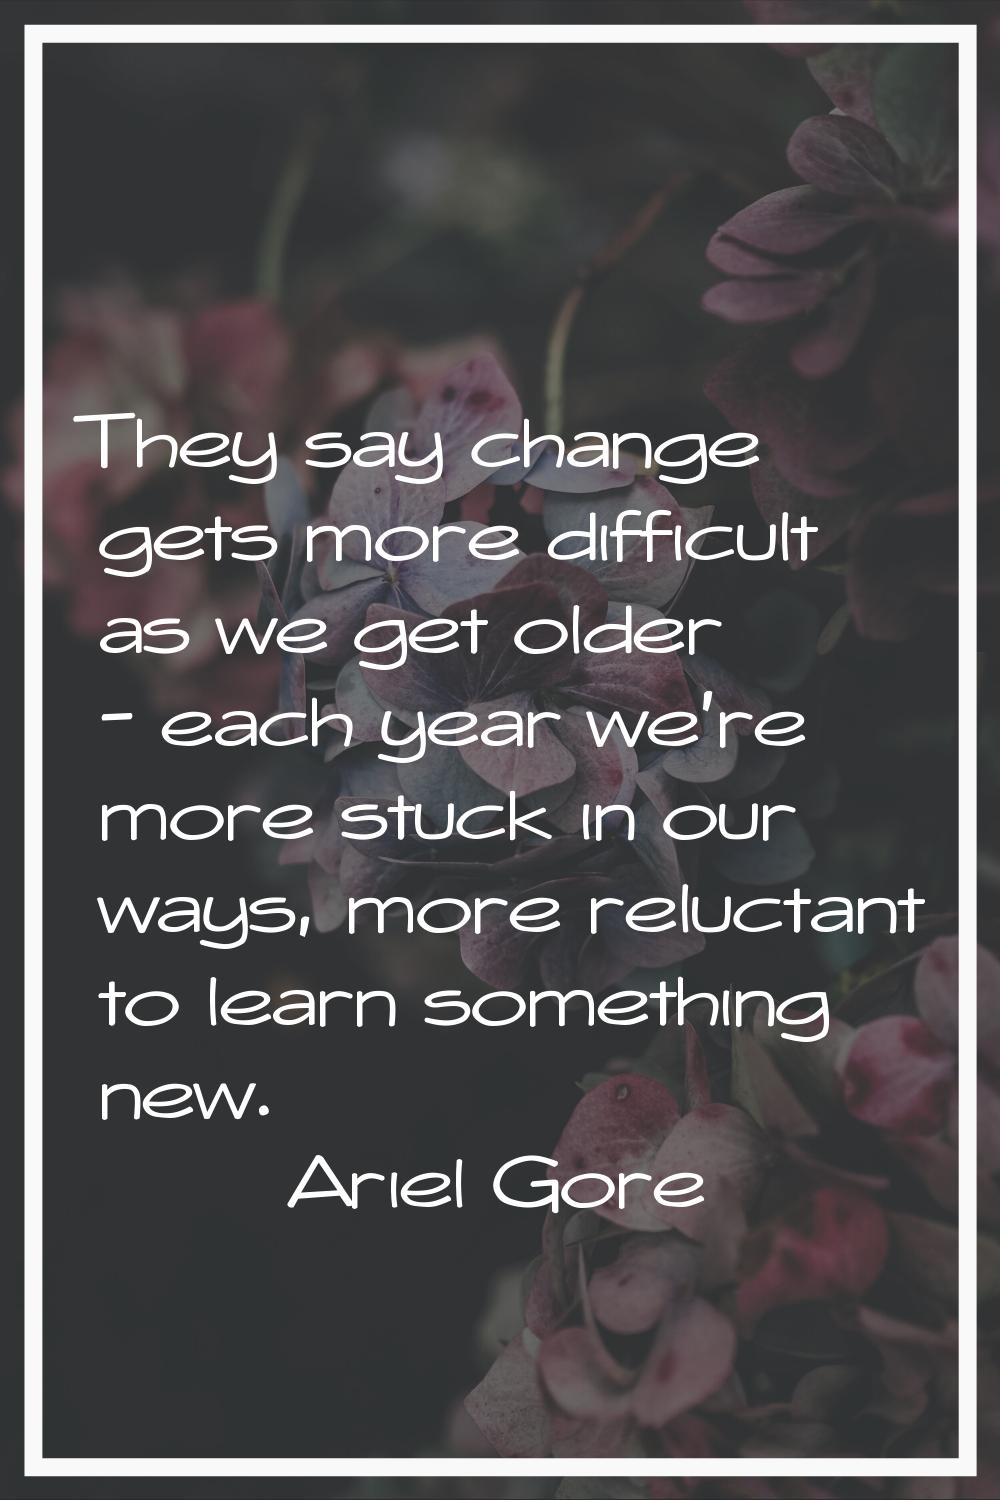 They say change gets more difficult as we get older - each year we're more stuck in our ways, more 